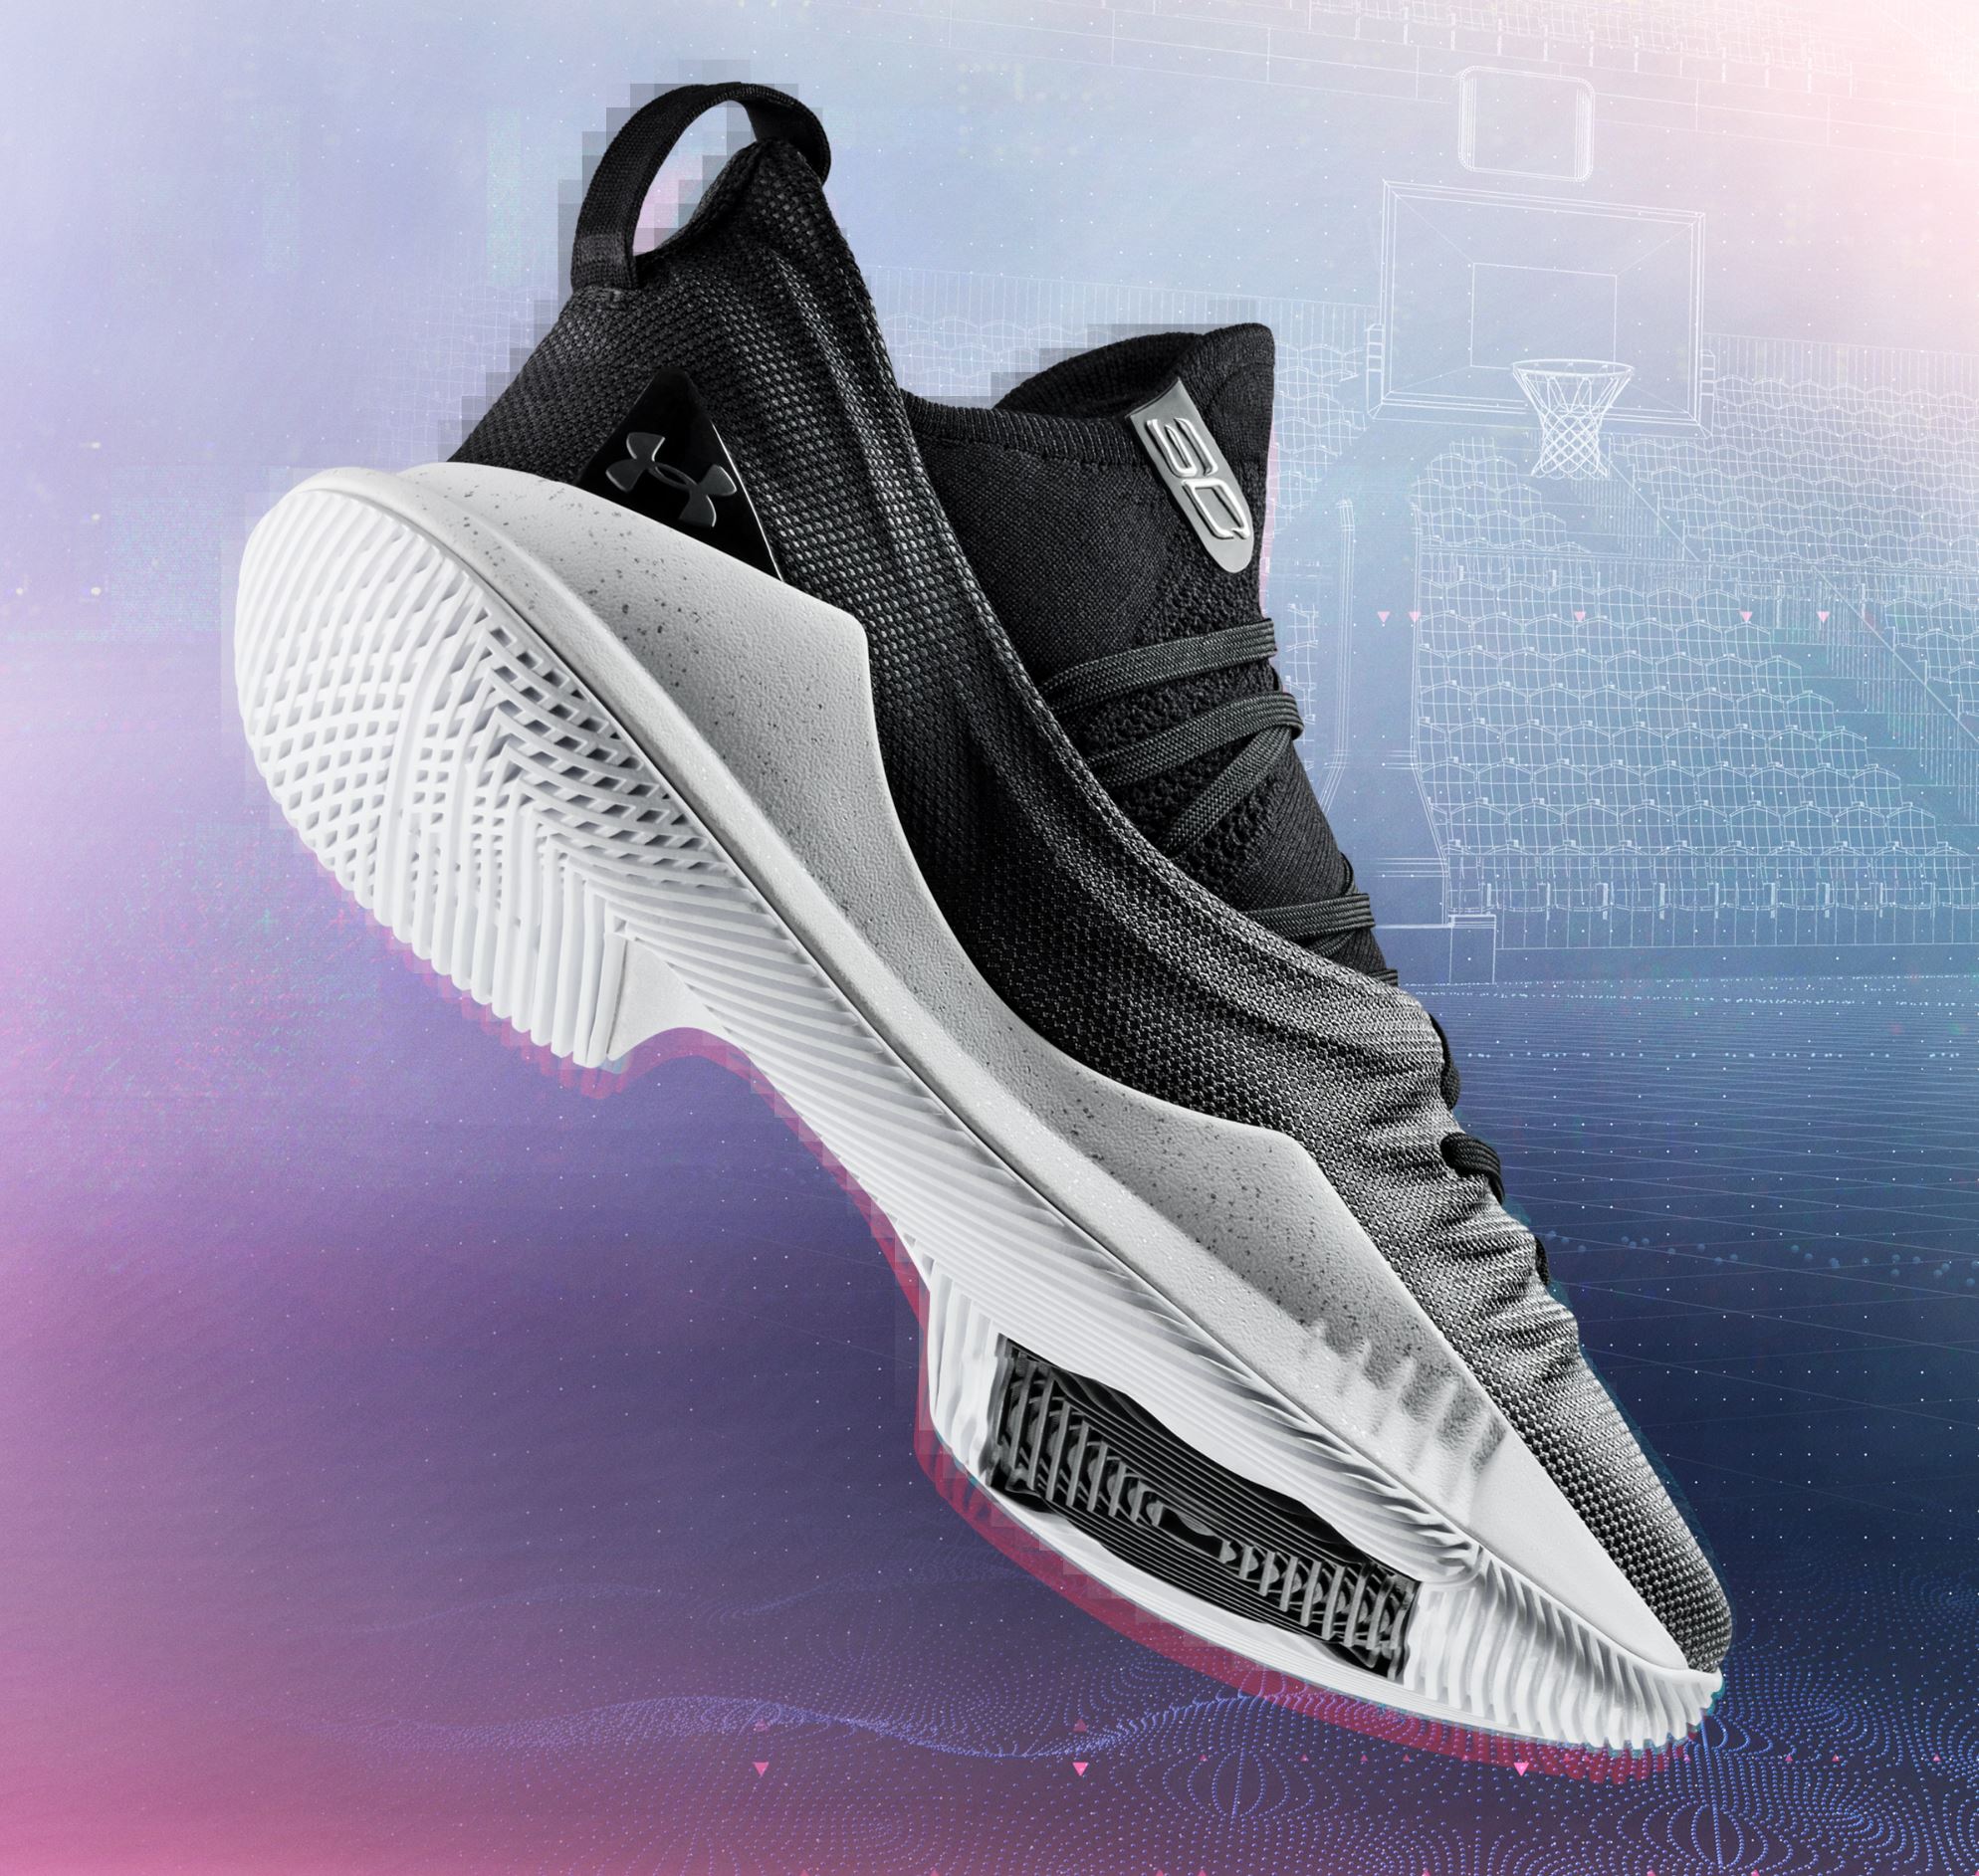 under armour curry 5 black white release date